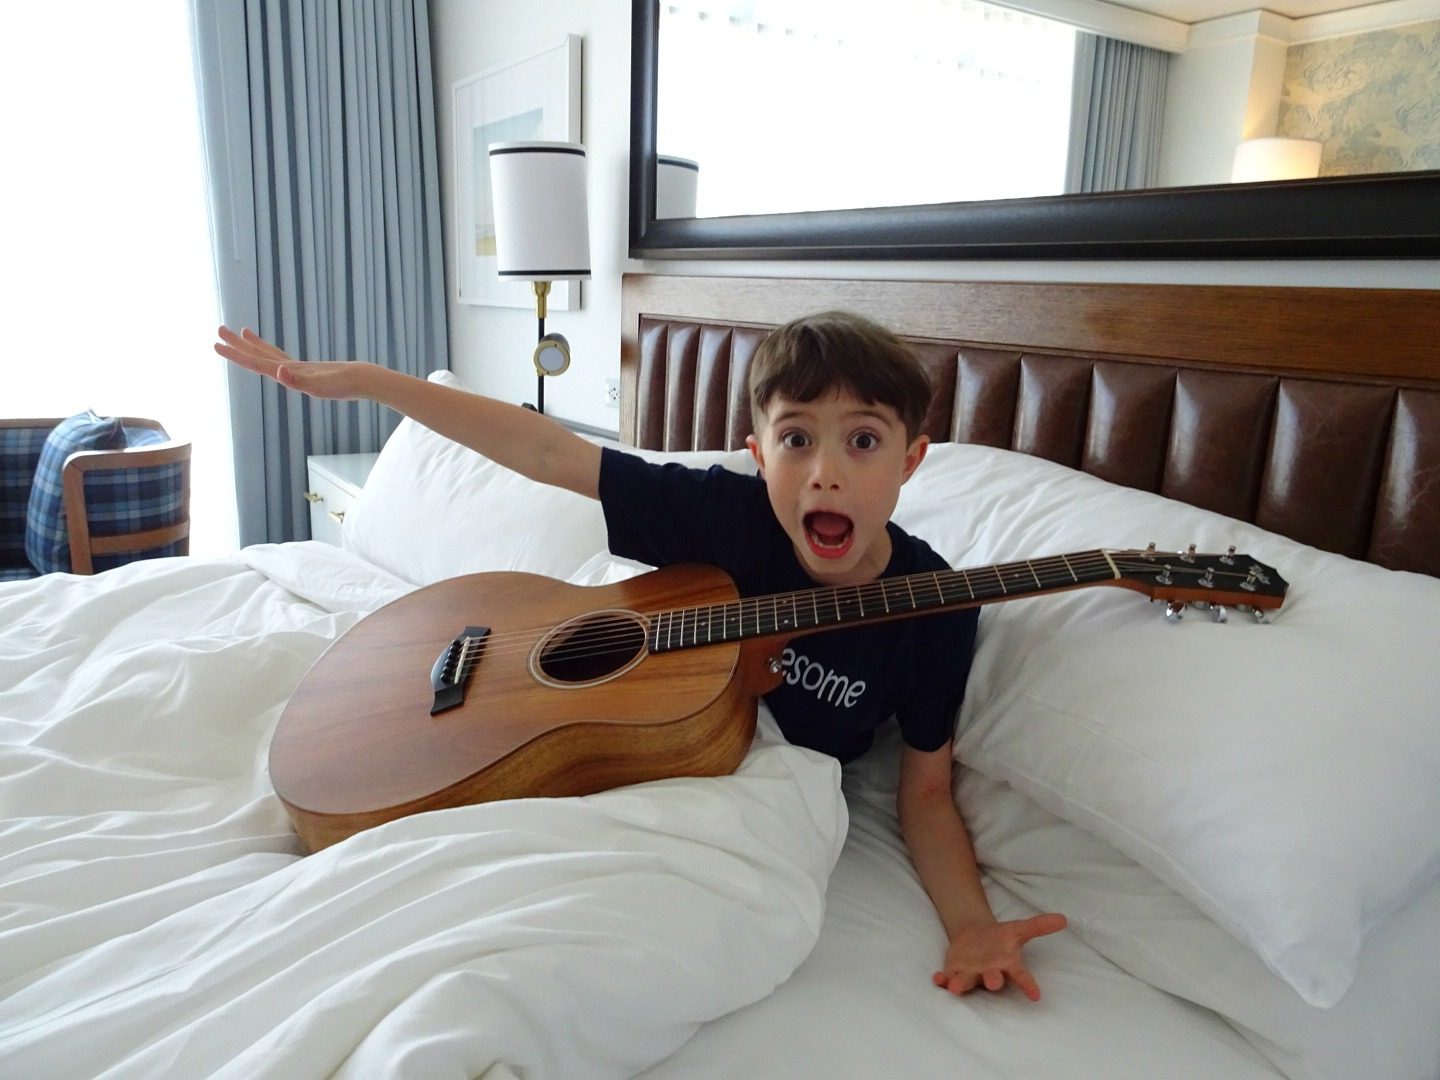 Luxury Stay at Pendry Hotel San Diego with Kids